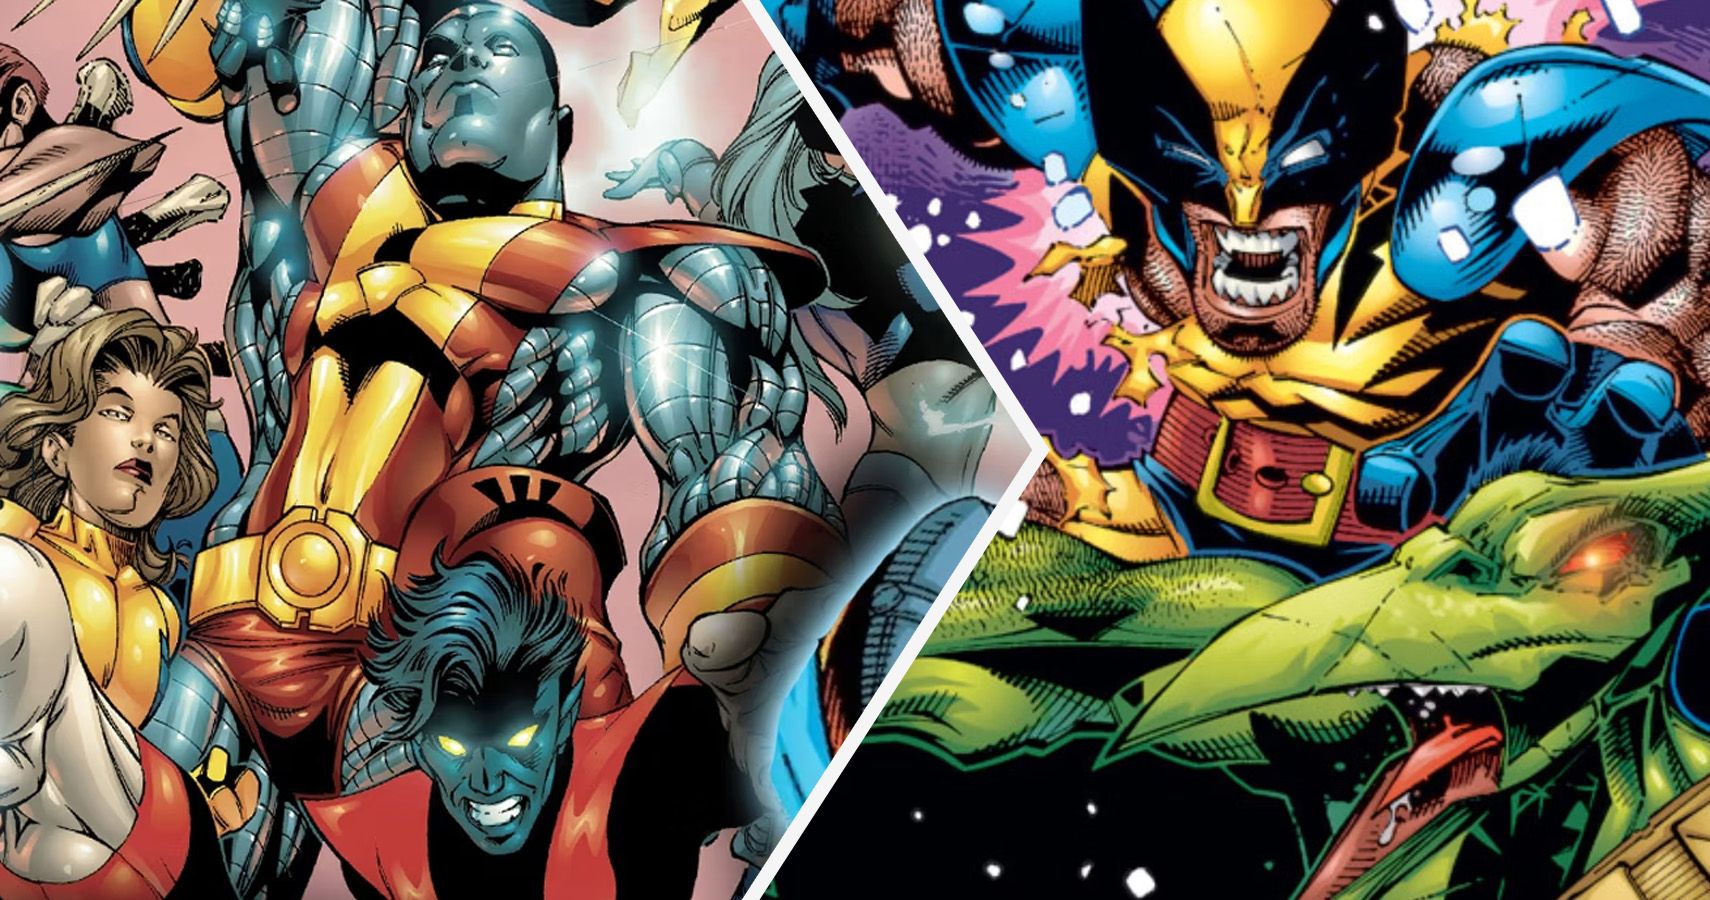 a split image of 90s xmen characters including wolverine and nightcrawler